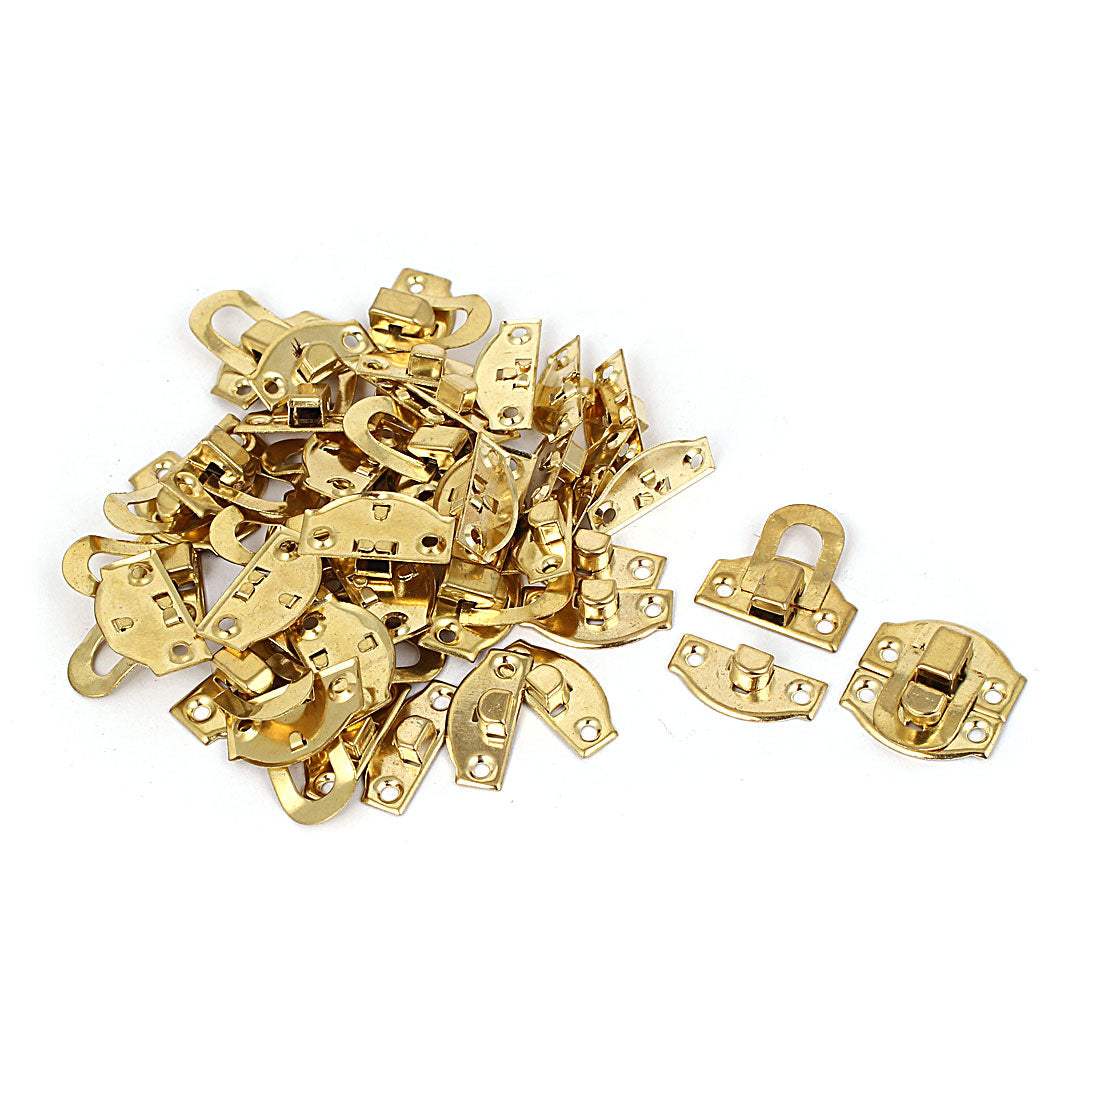 uxcell Uxcell Suitcase Case Chest Box Decorative Lock Hasp Metal Toggle Latch Gold Tone 20pcs